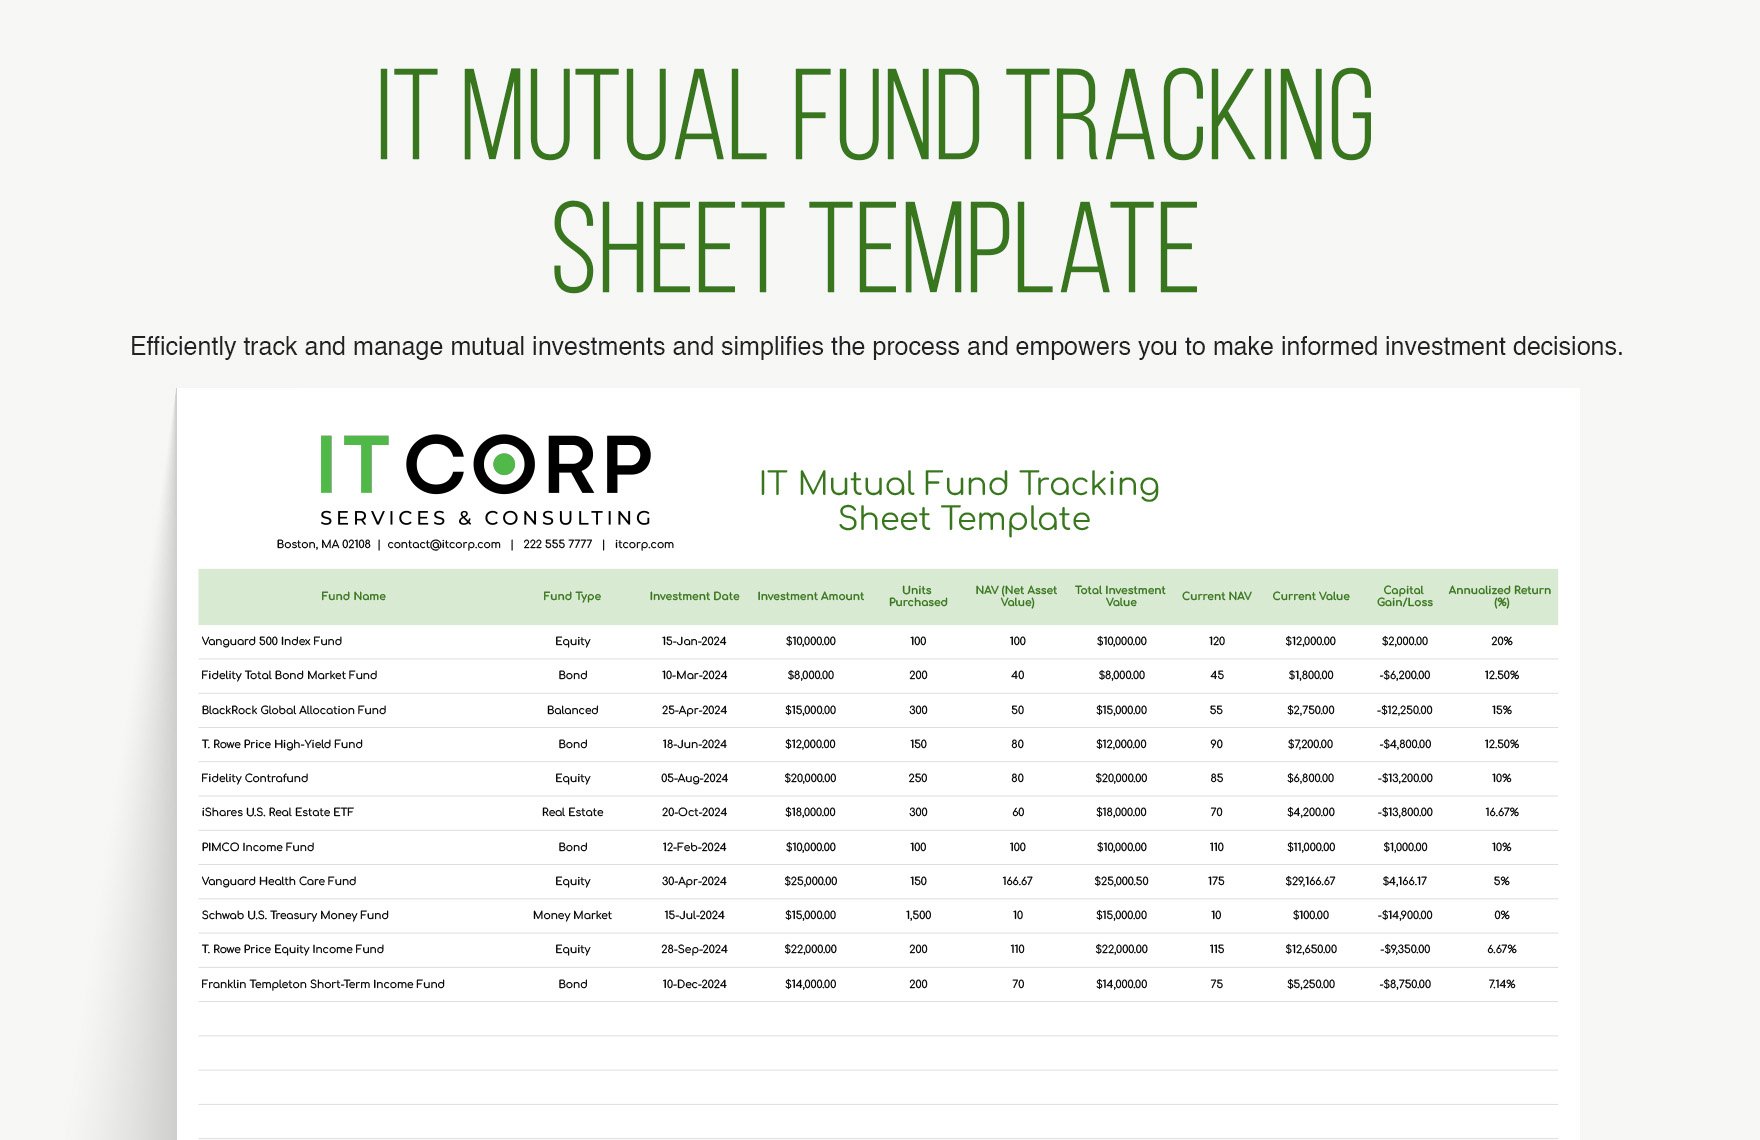 IT Mutual Fund Tracking Sheet Template in Excel, Google Sheets